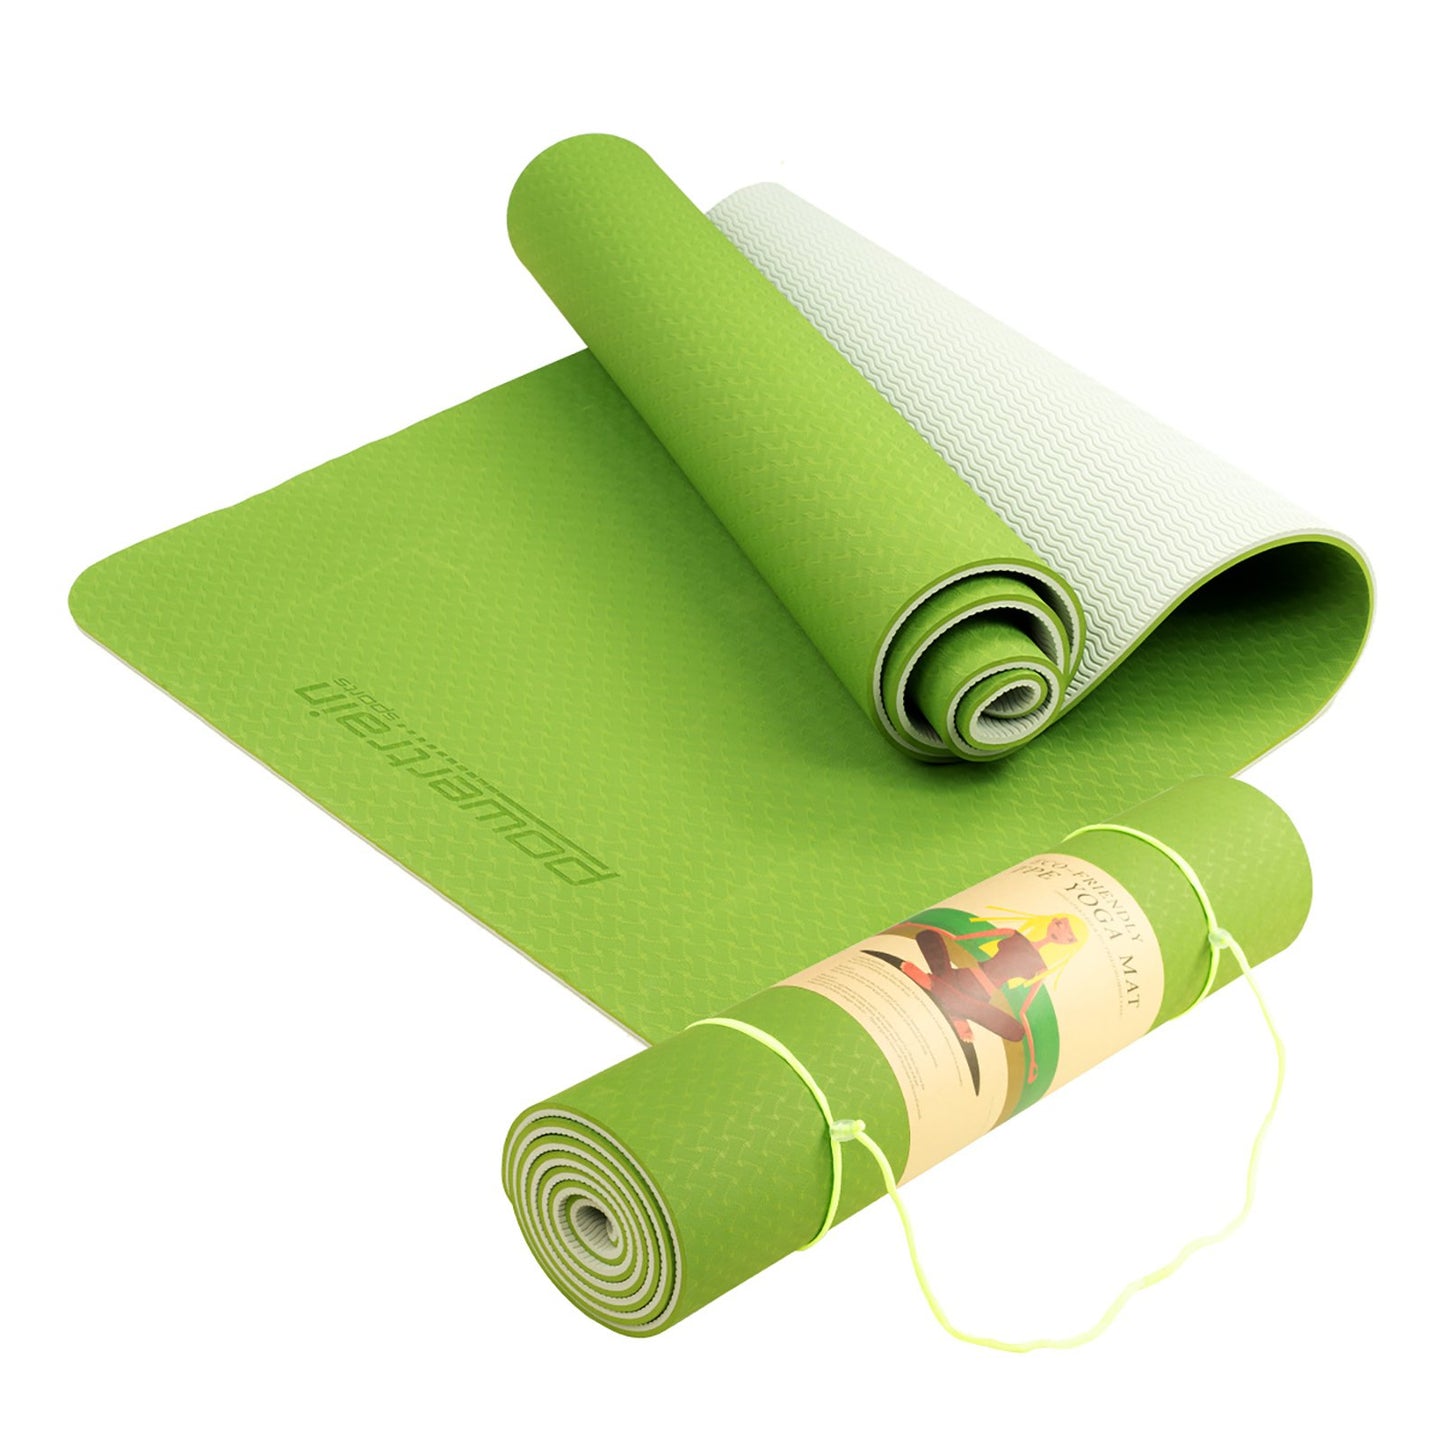 Powertrain Eco-Friendly Dual layer 8mm Yoga Mat | Lime Green | Non-Slip Surface, and Carry Strap for Ultimate Comfort and Portability